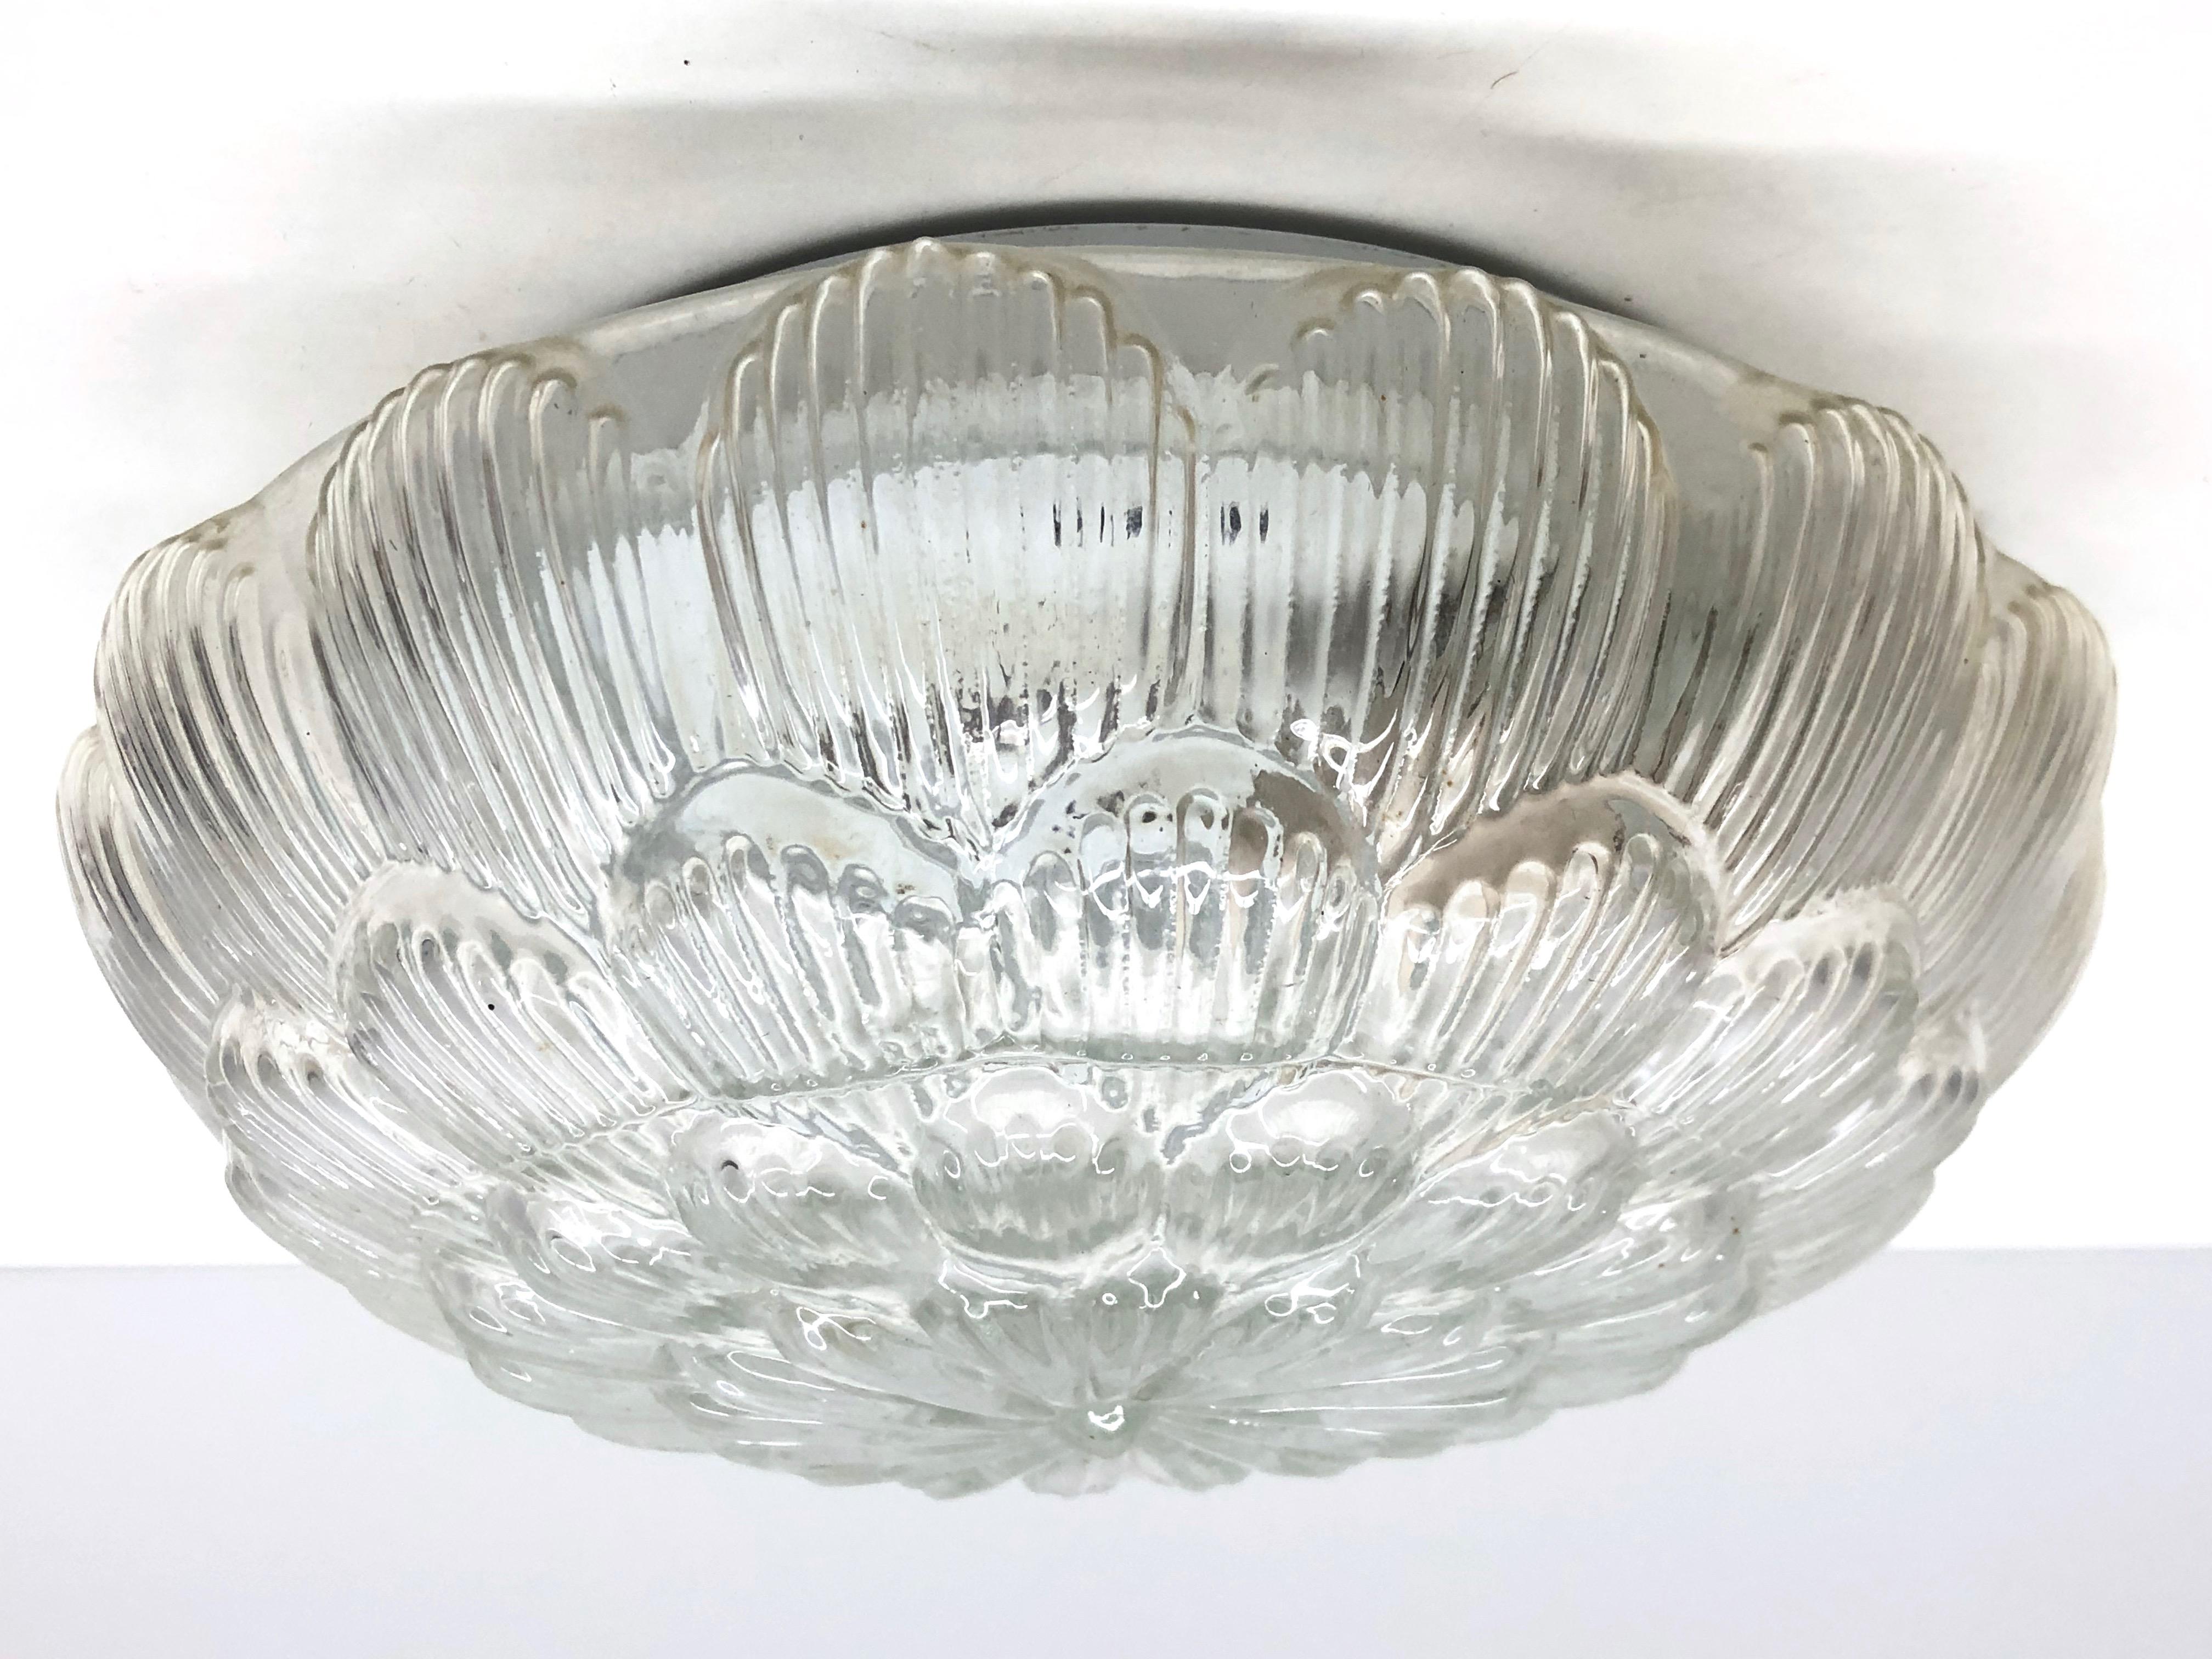 A beautiful flush mount by Massive Leuchten, Germany. Gorgeous textured glass flush mount with metal fixture. The fixture requires one European E27 Edison or medium bulb up to 60 watts.